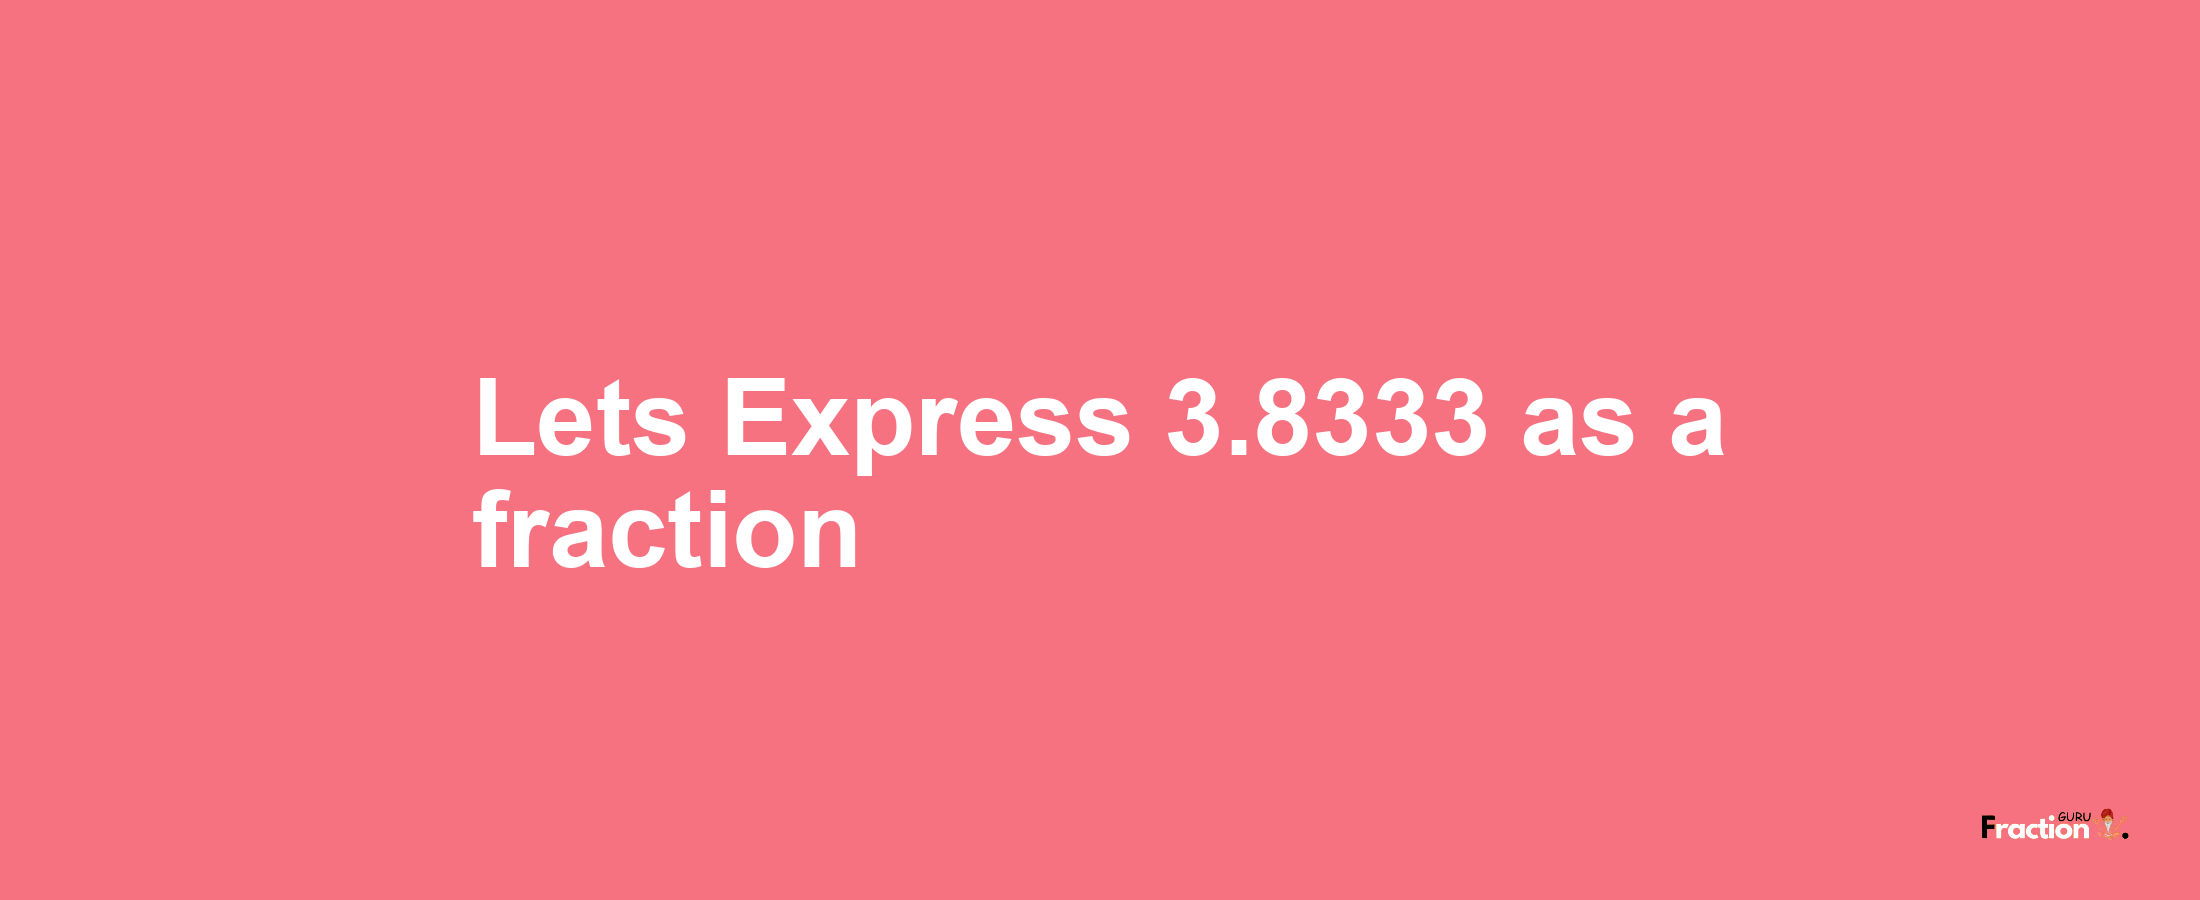 Lets Express 3.8333 as afraction